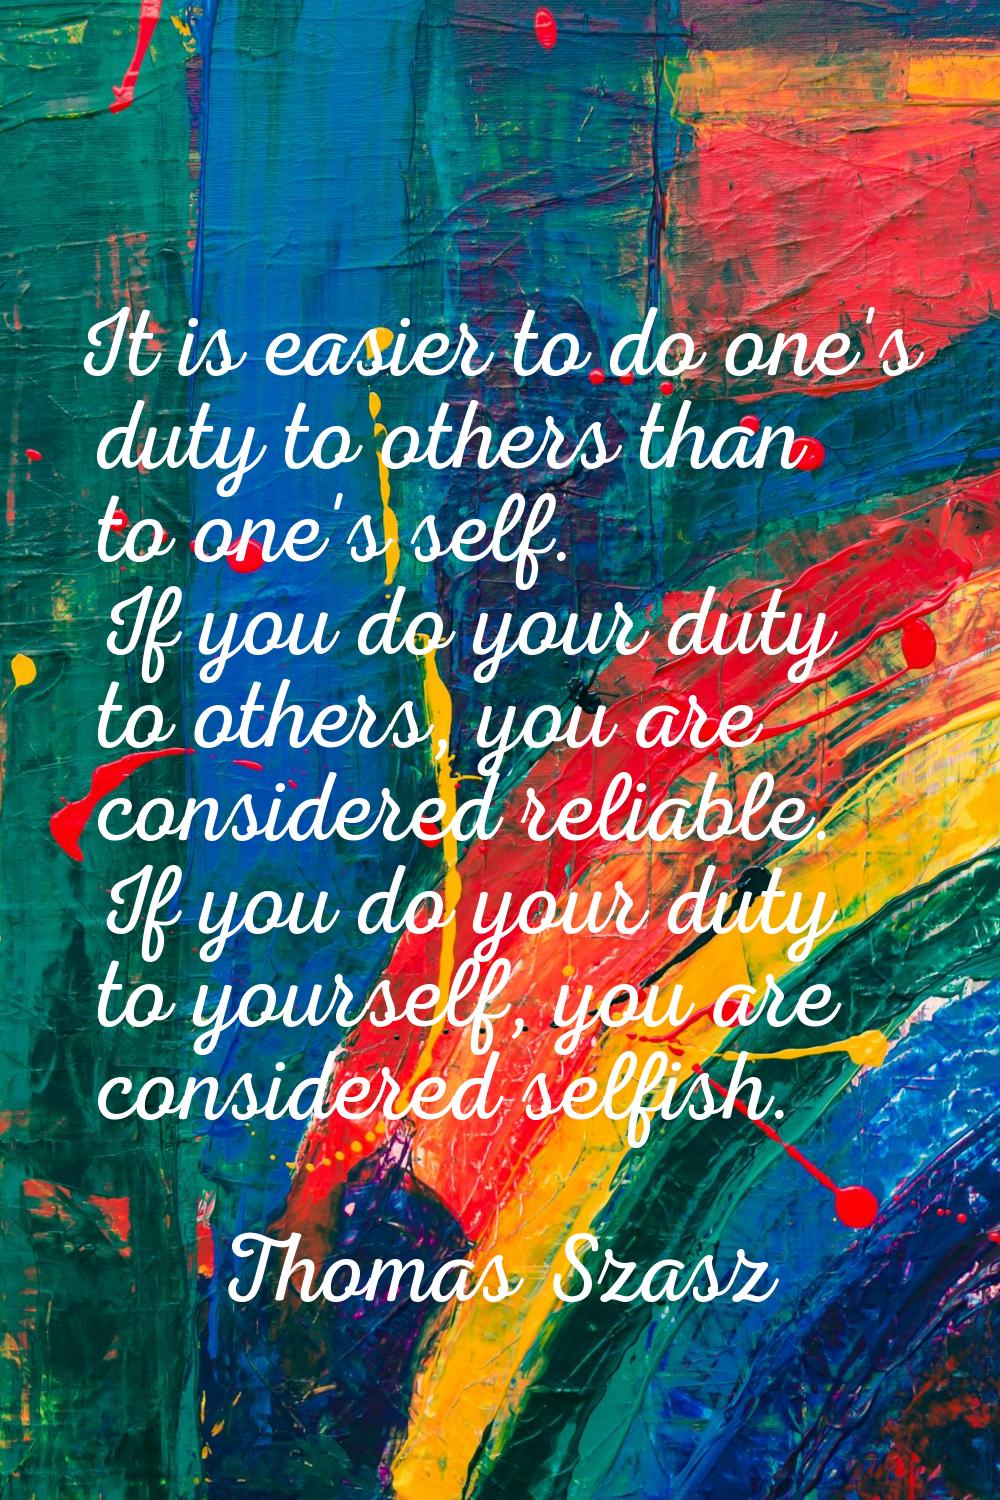 It is easier to do one's duty to others than to one's self. If you do your duty to others, you are 